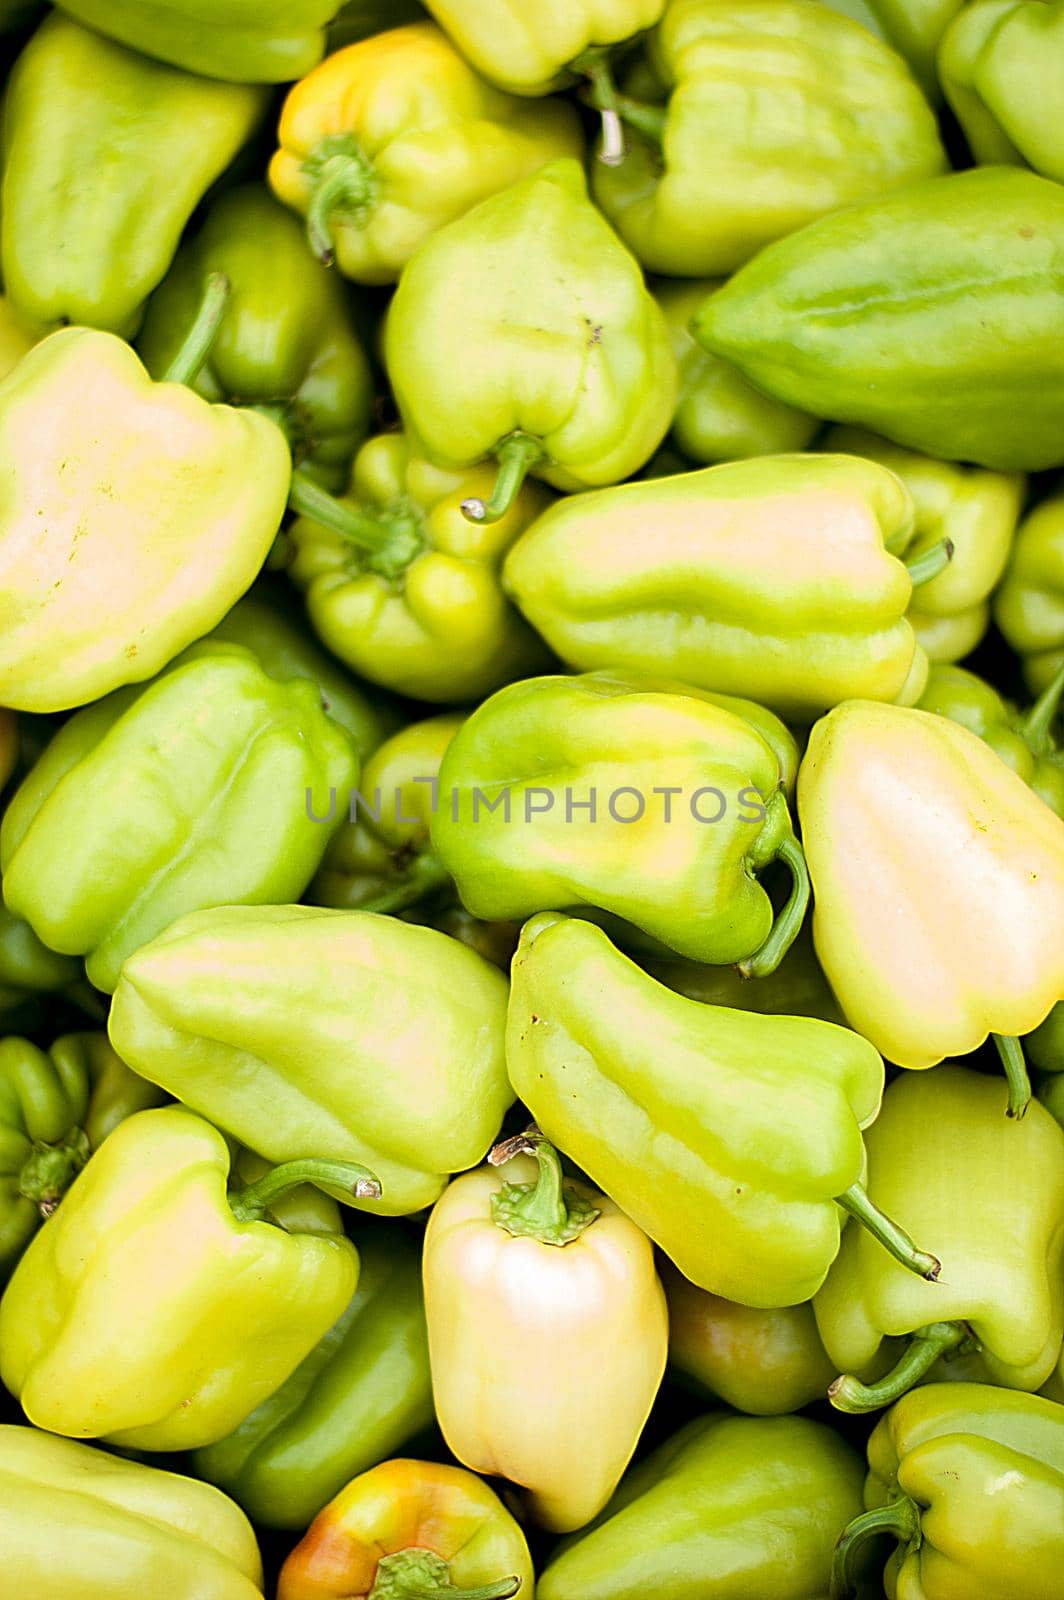 selected sweet peppers on the market. High quality photo